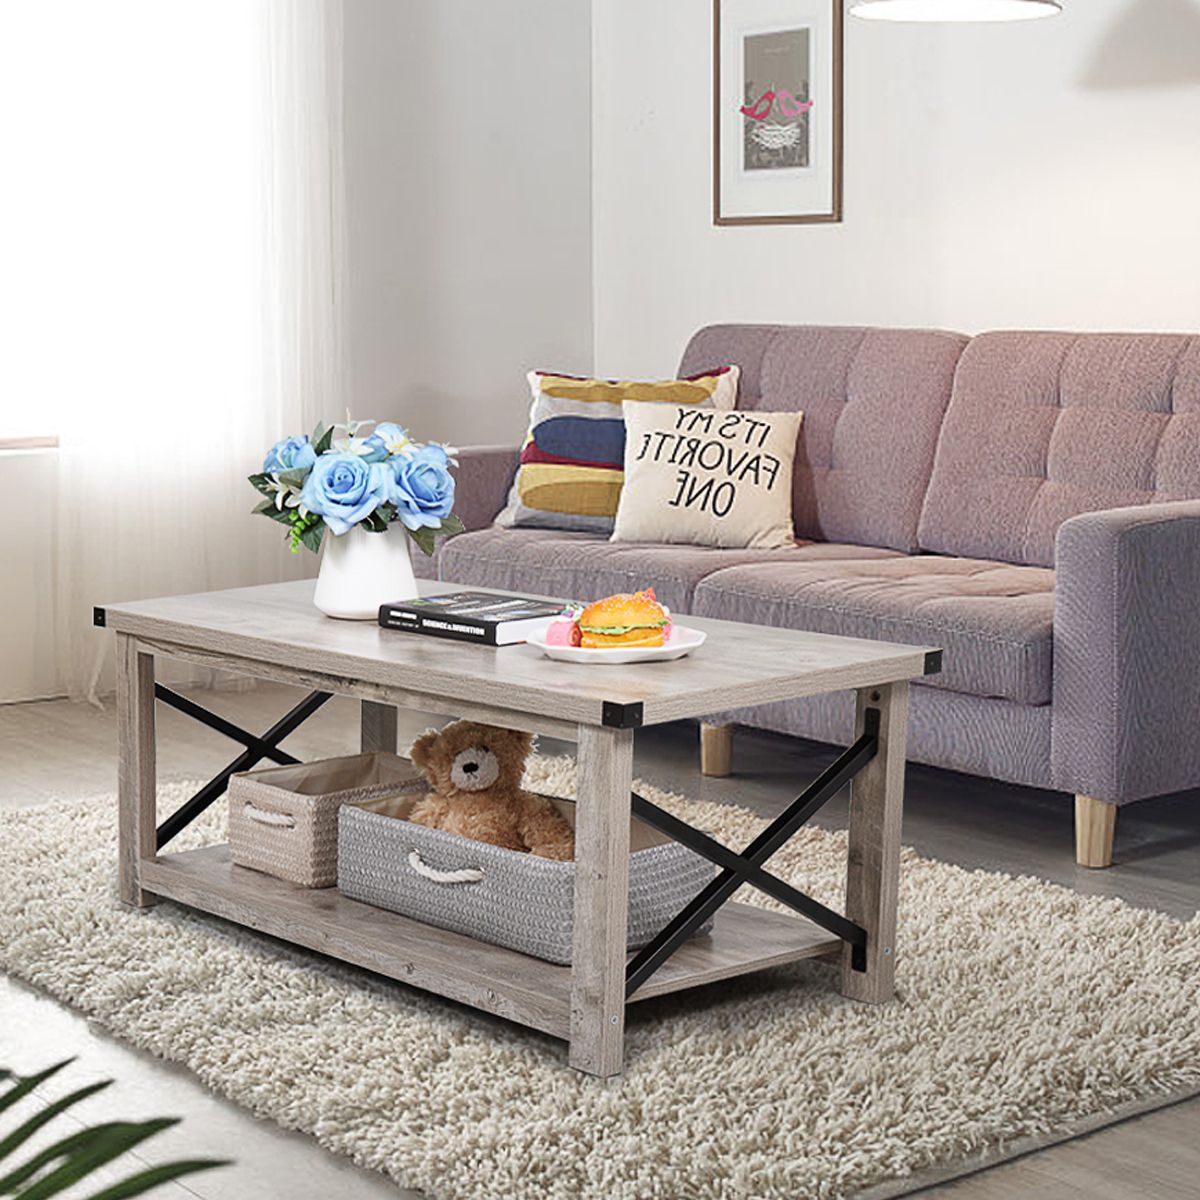 2019 Black Wood Storage Coffee Tables Within Jaxpety Metal X Frame Coffee Table Wood Rectangle Coffee (View 3 of 20)